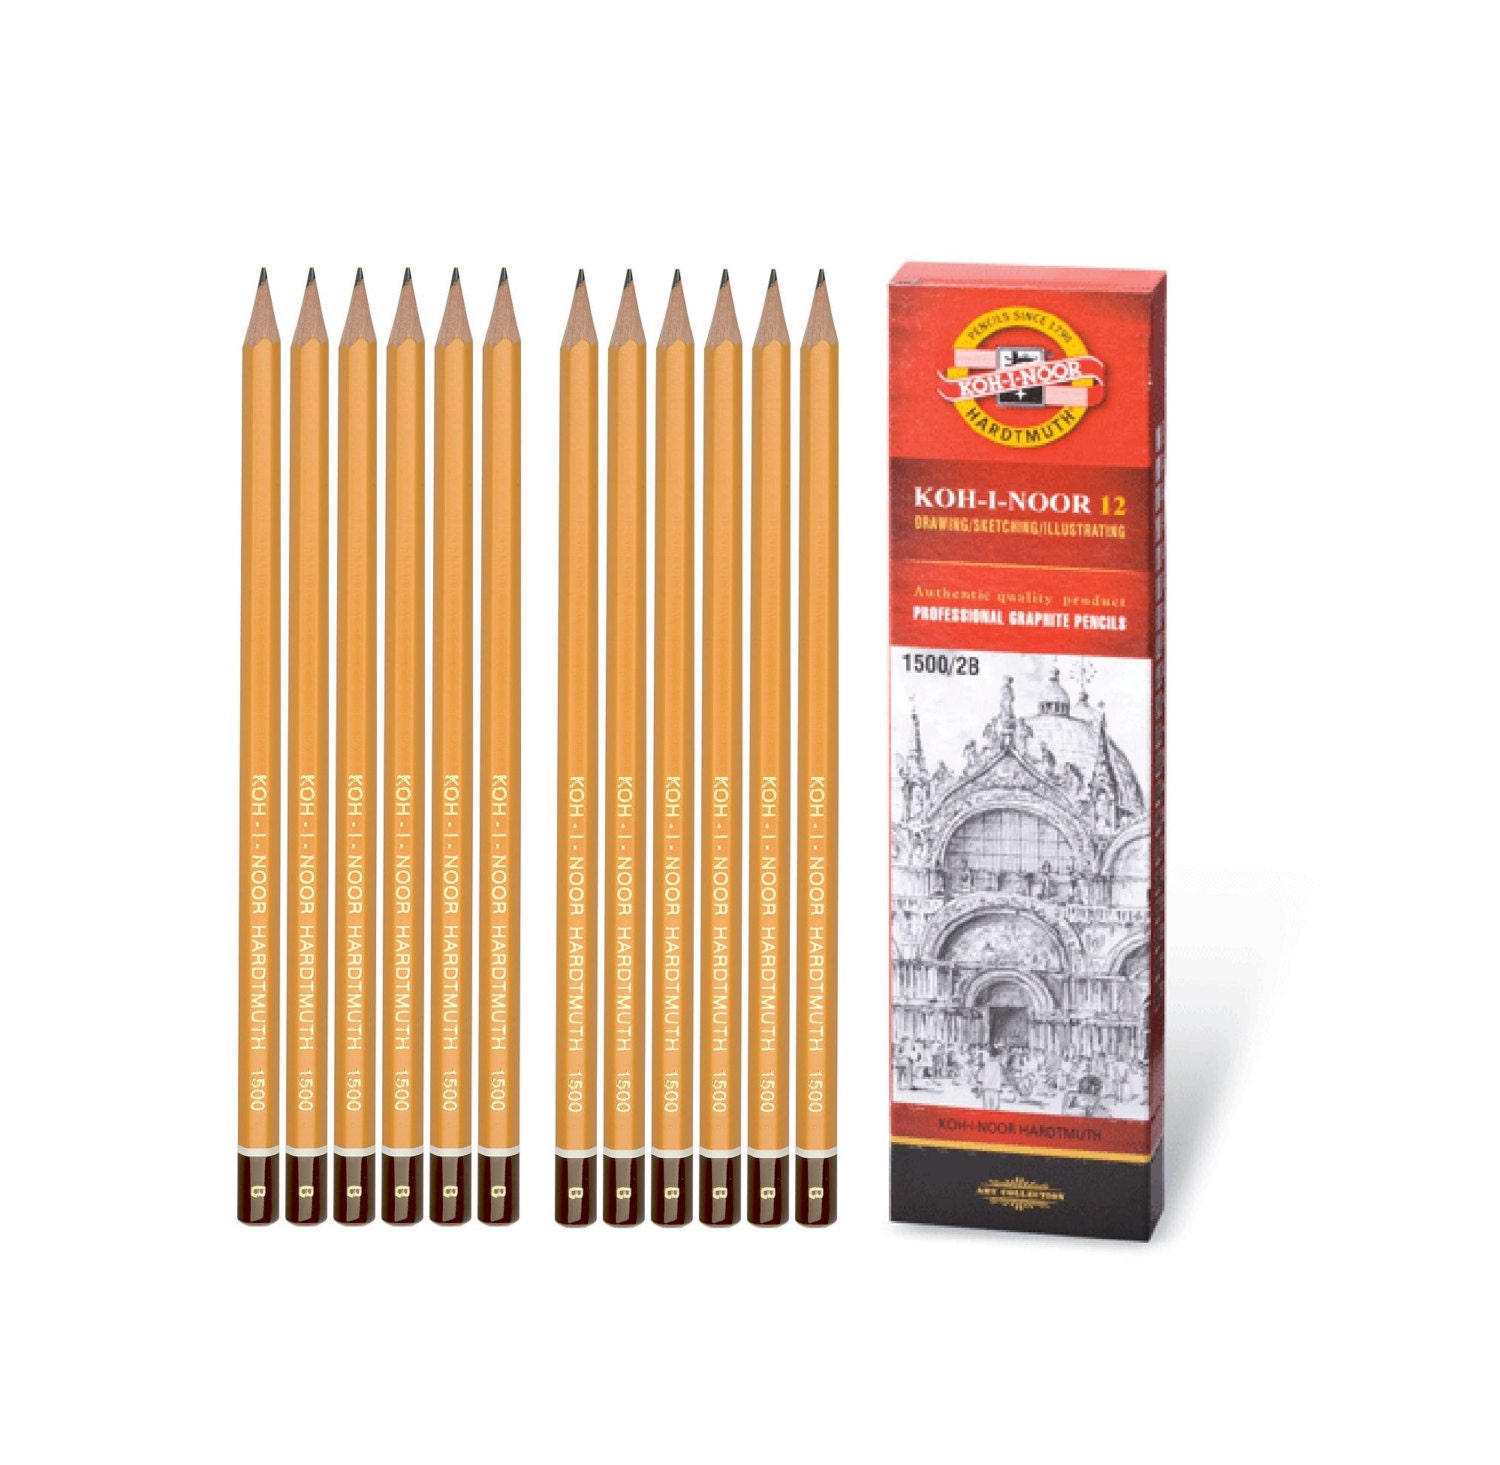  Sketch Pencils For Drawing,41 Piece Drawing Pencils